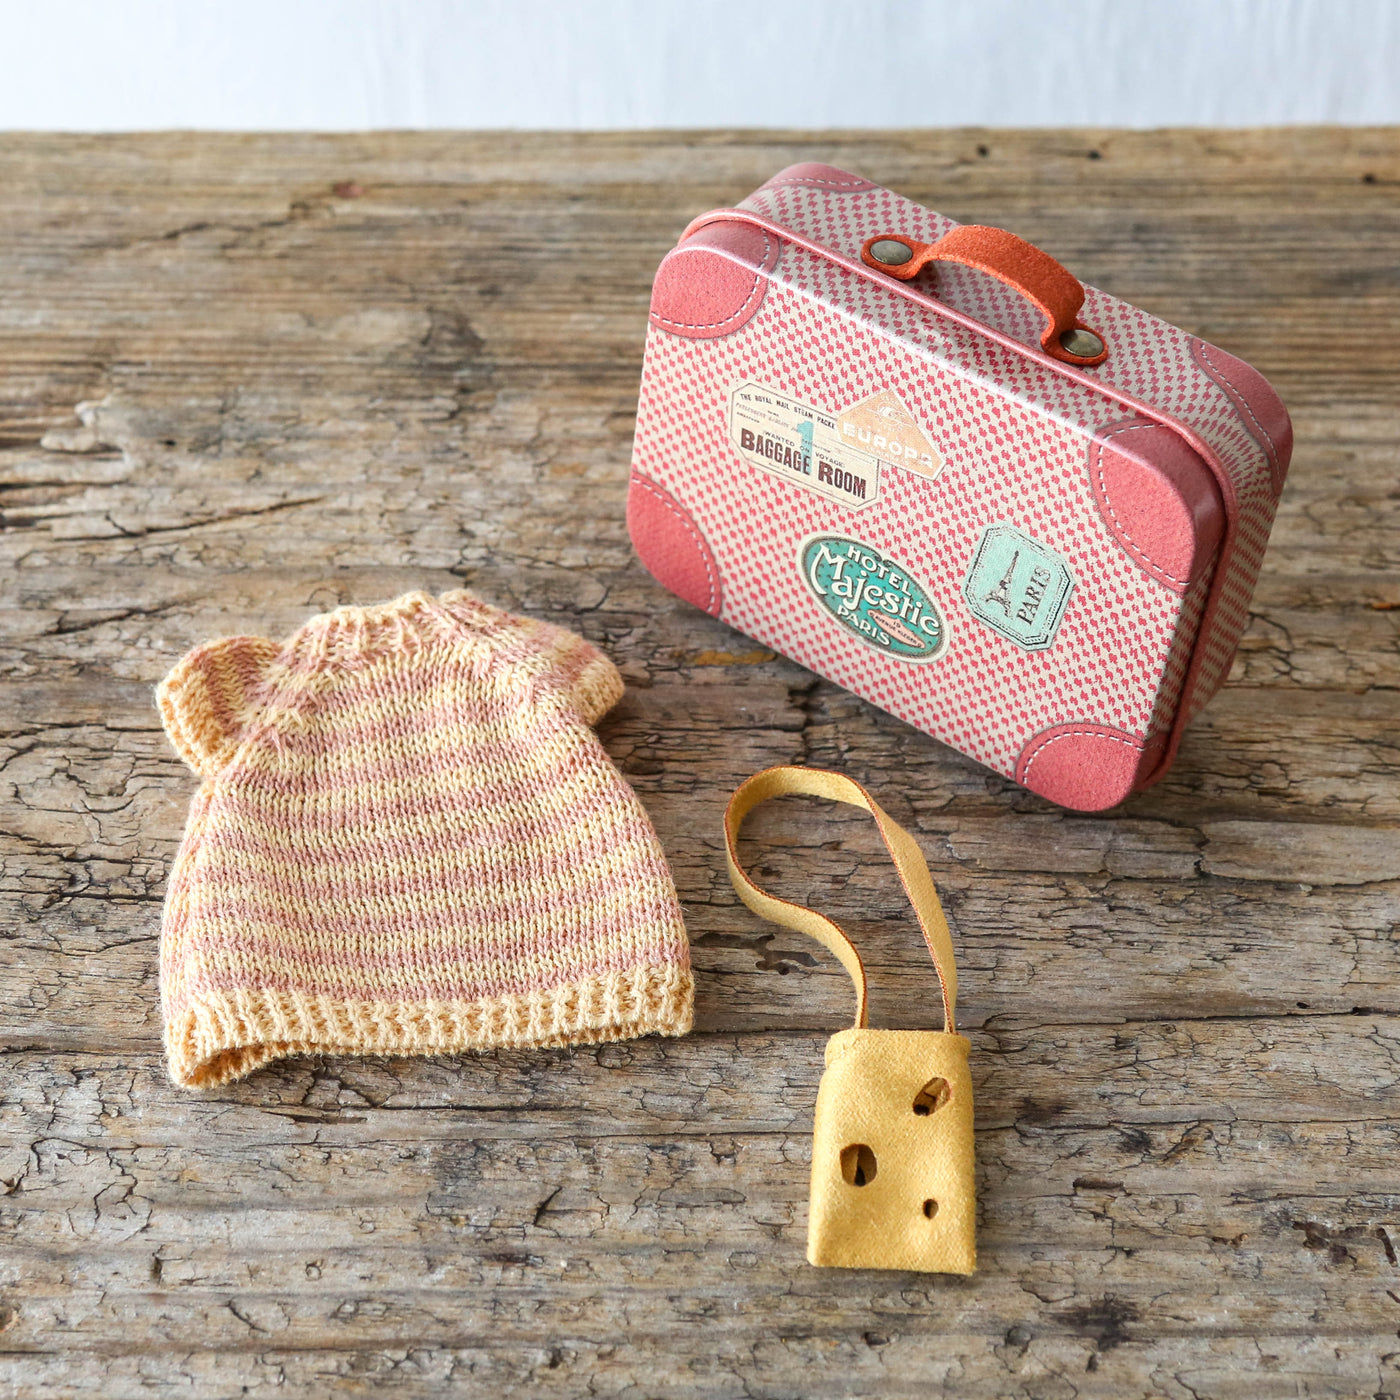 Knitted Dress & Bag in Suitcase - Big Sister Mouse